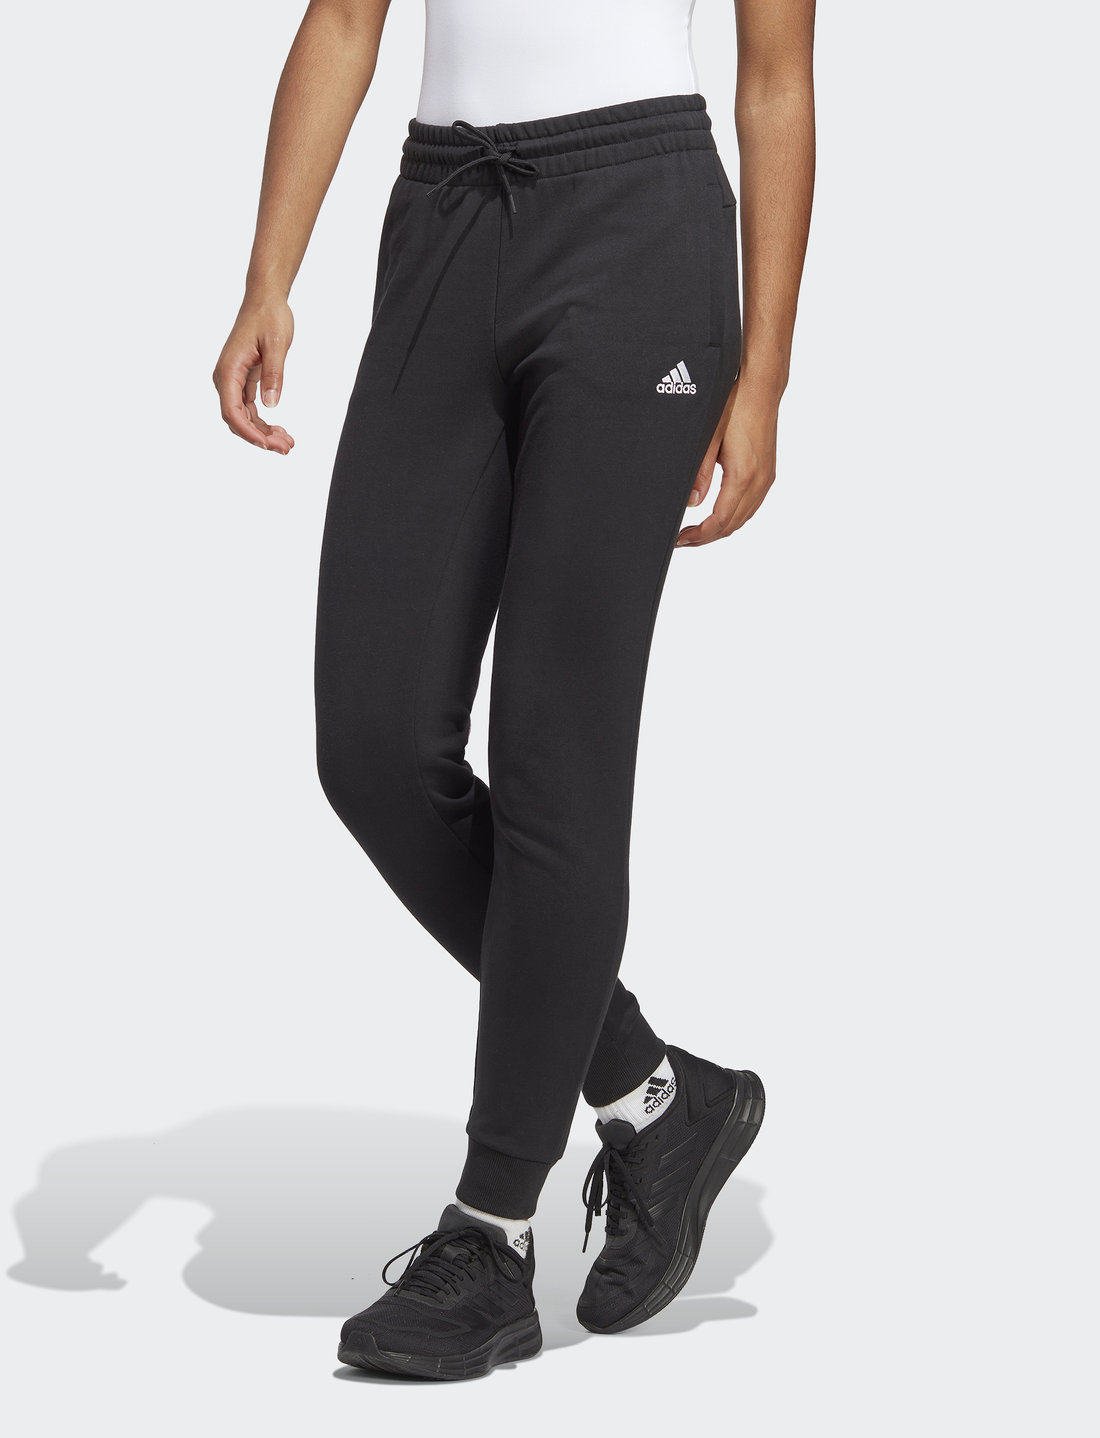 adidas Sportswear Essentials Linear French Terry Cuffed Pant - Sweatpants 